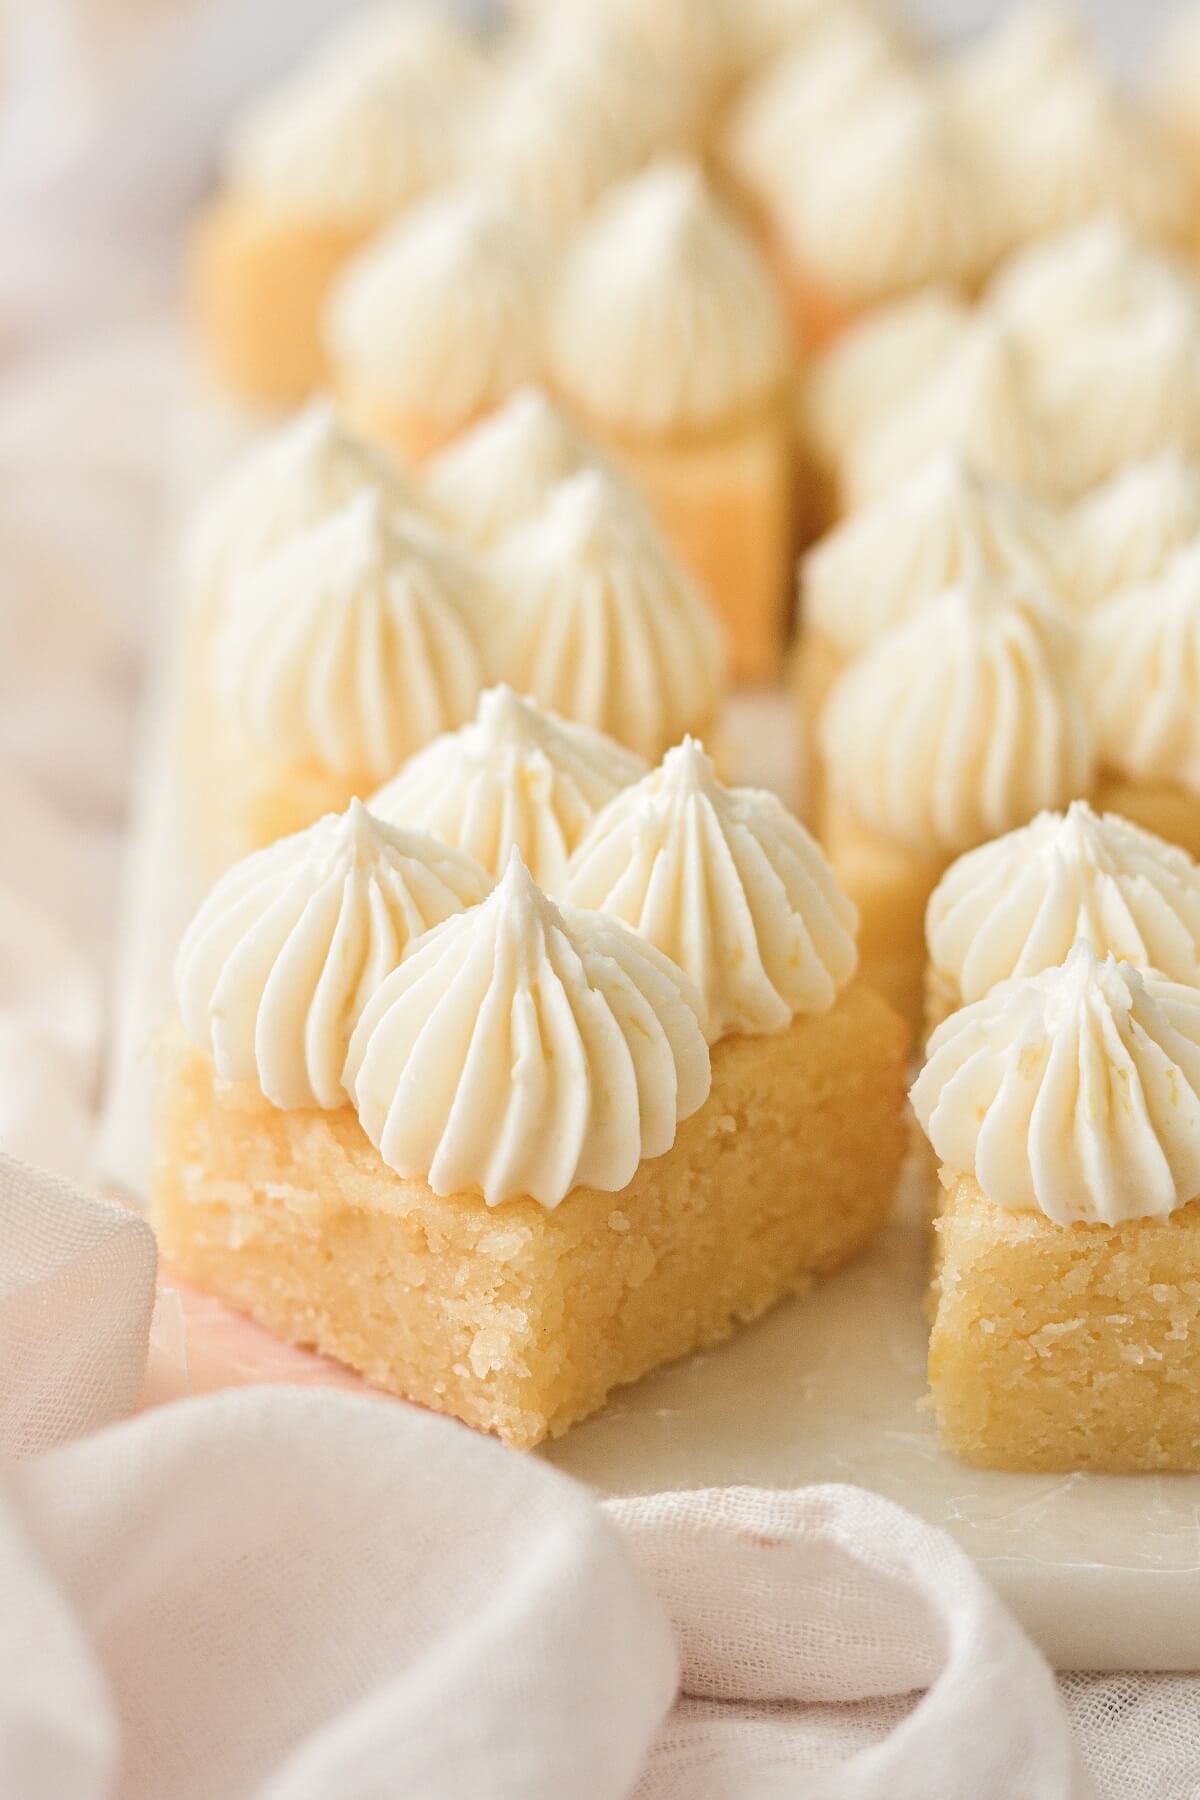 Lemonies, or lemon brownies, cut into squares and frosted with piped lemon buttercream.